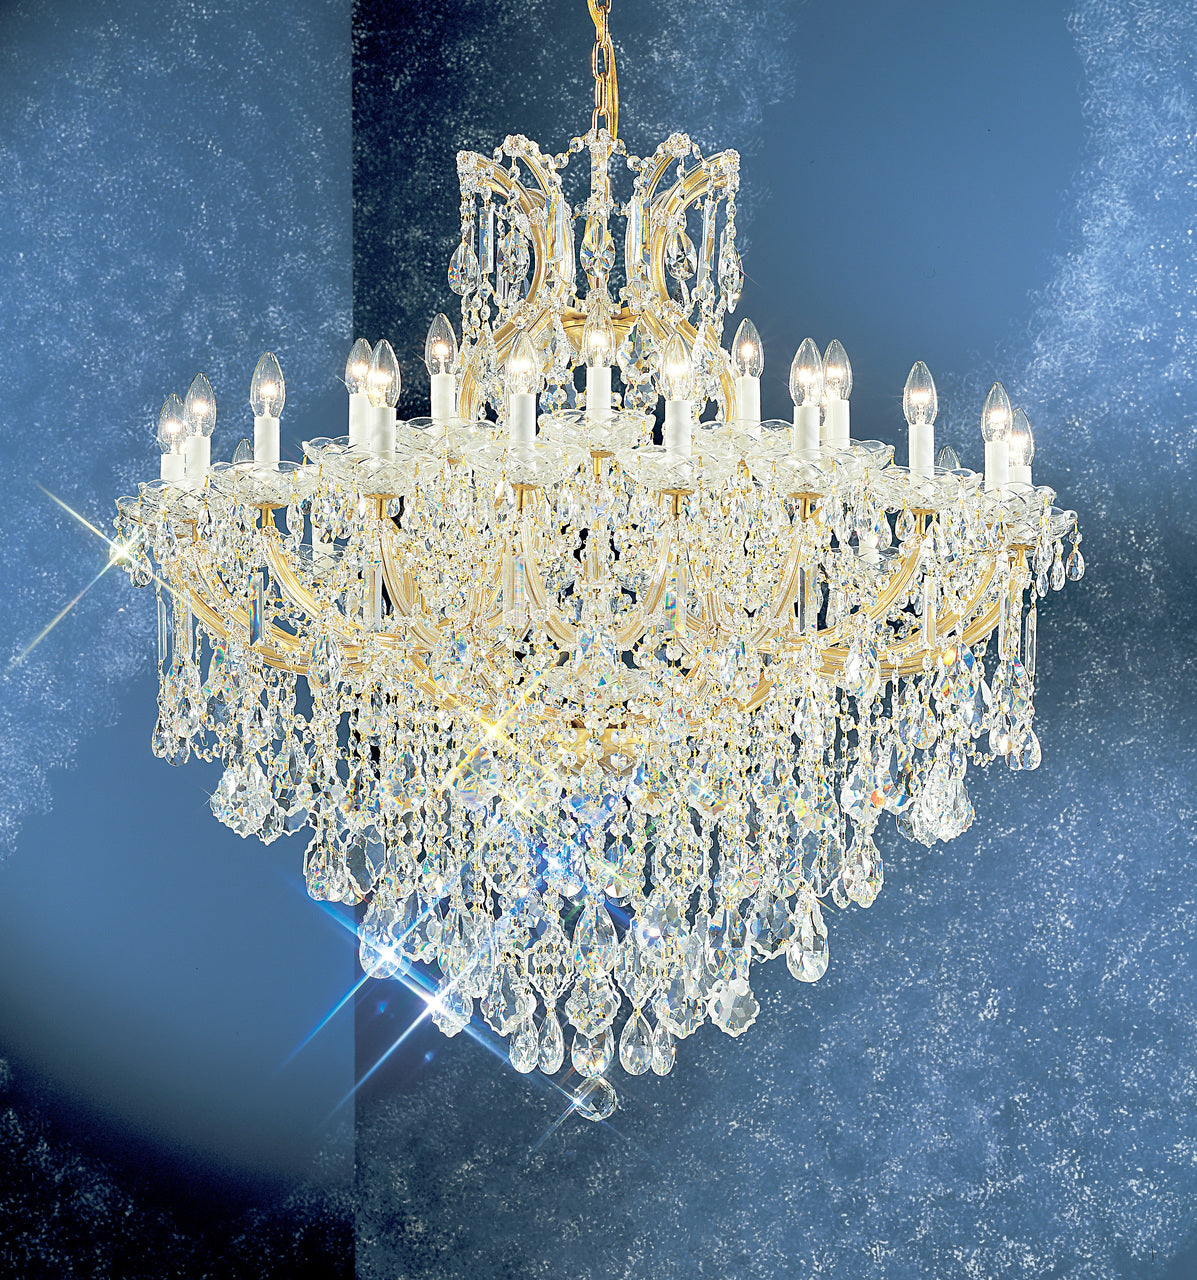 Classic Lighting 8180 OWG S Maria Theresa Traditional Crystal Chandelier in Olde World Gold (Imported from Italy)